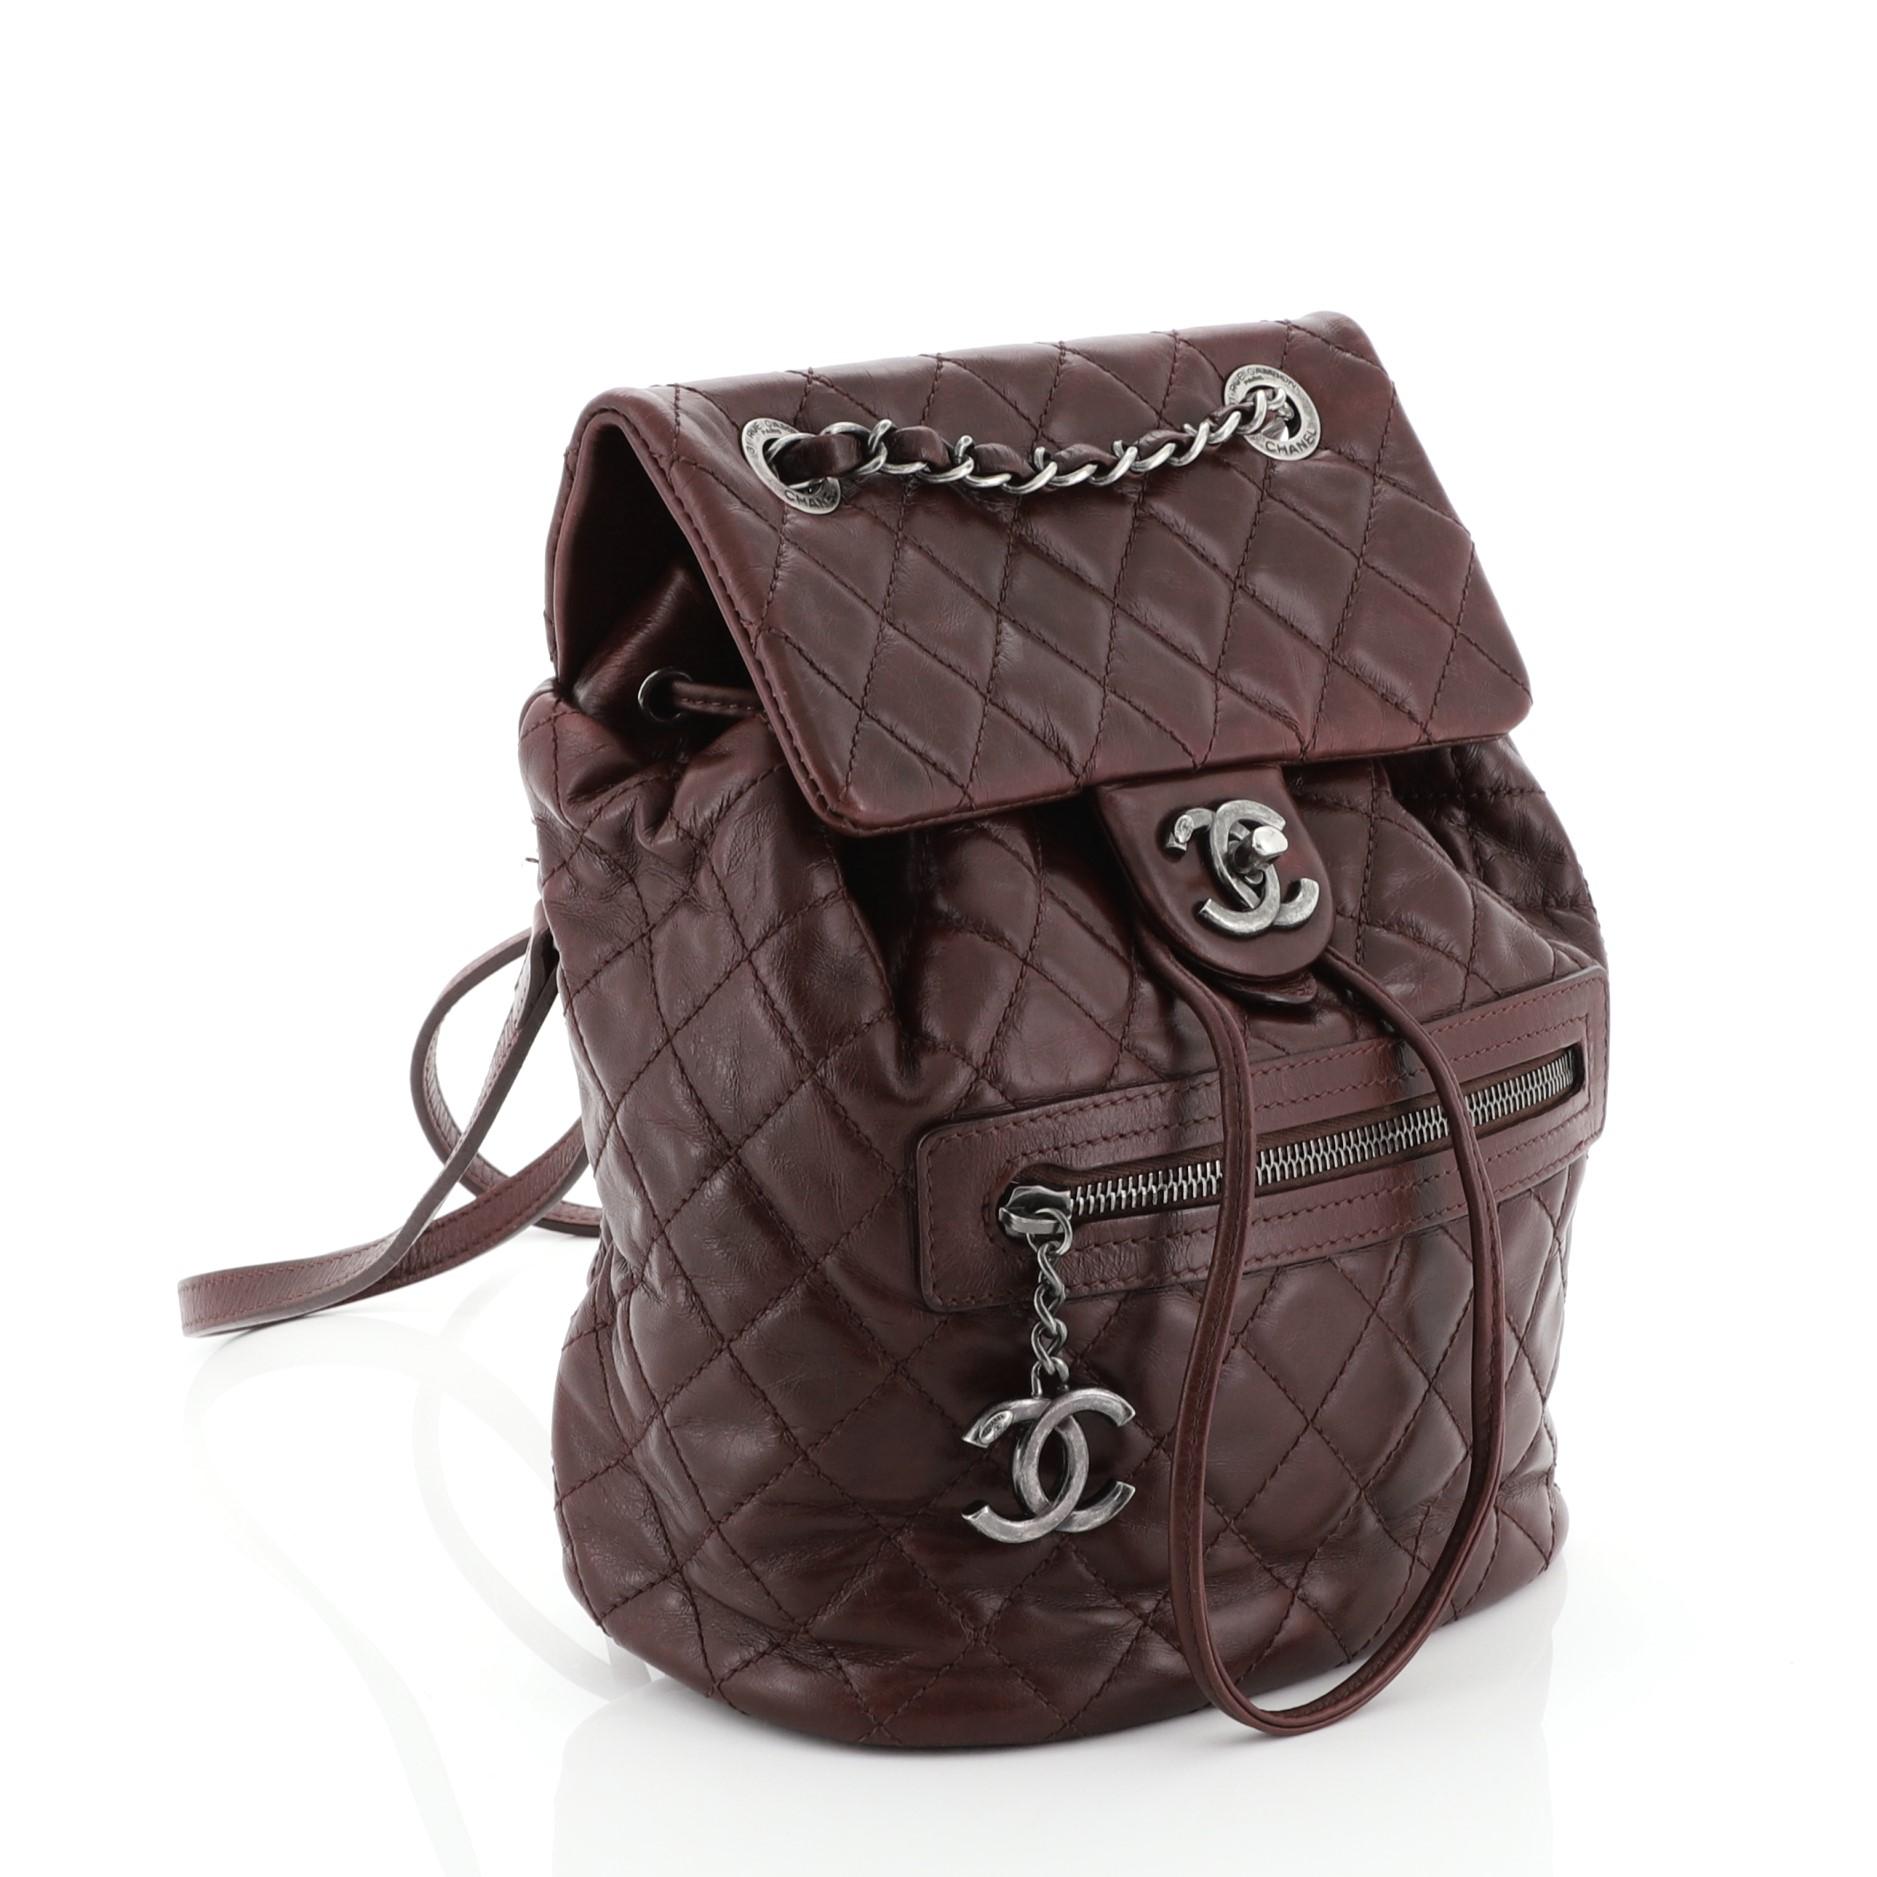 This Chanel Mountain Backpack Quilted Glazed Calfskin Small, crafted from red quilted glazed calfskin, features woven-in leather chain top handle, flat leather backpack straps, an exterior front pocket with CC logo zipper, exterior back slip pocket